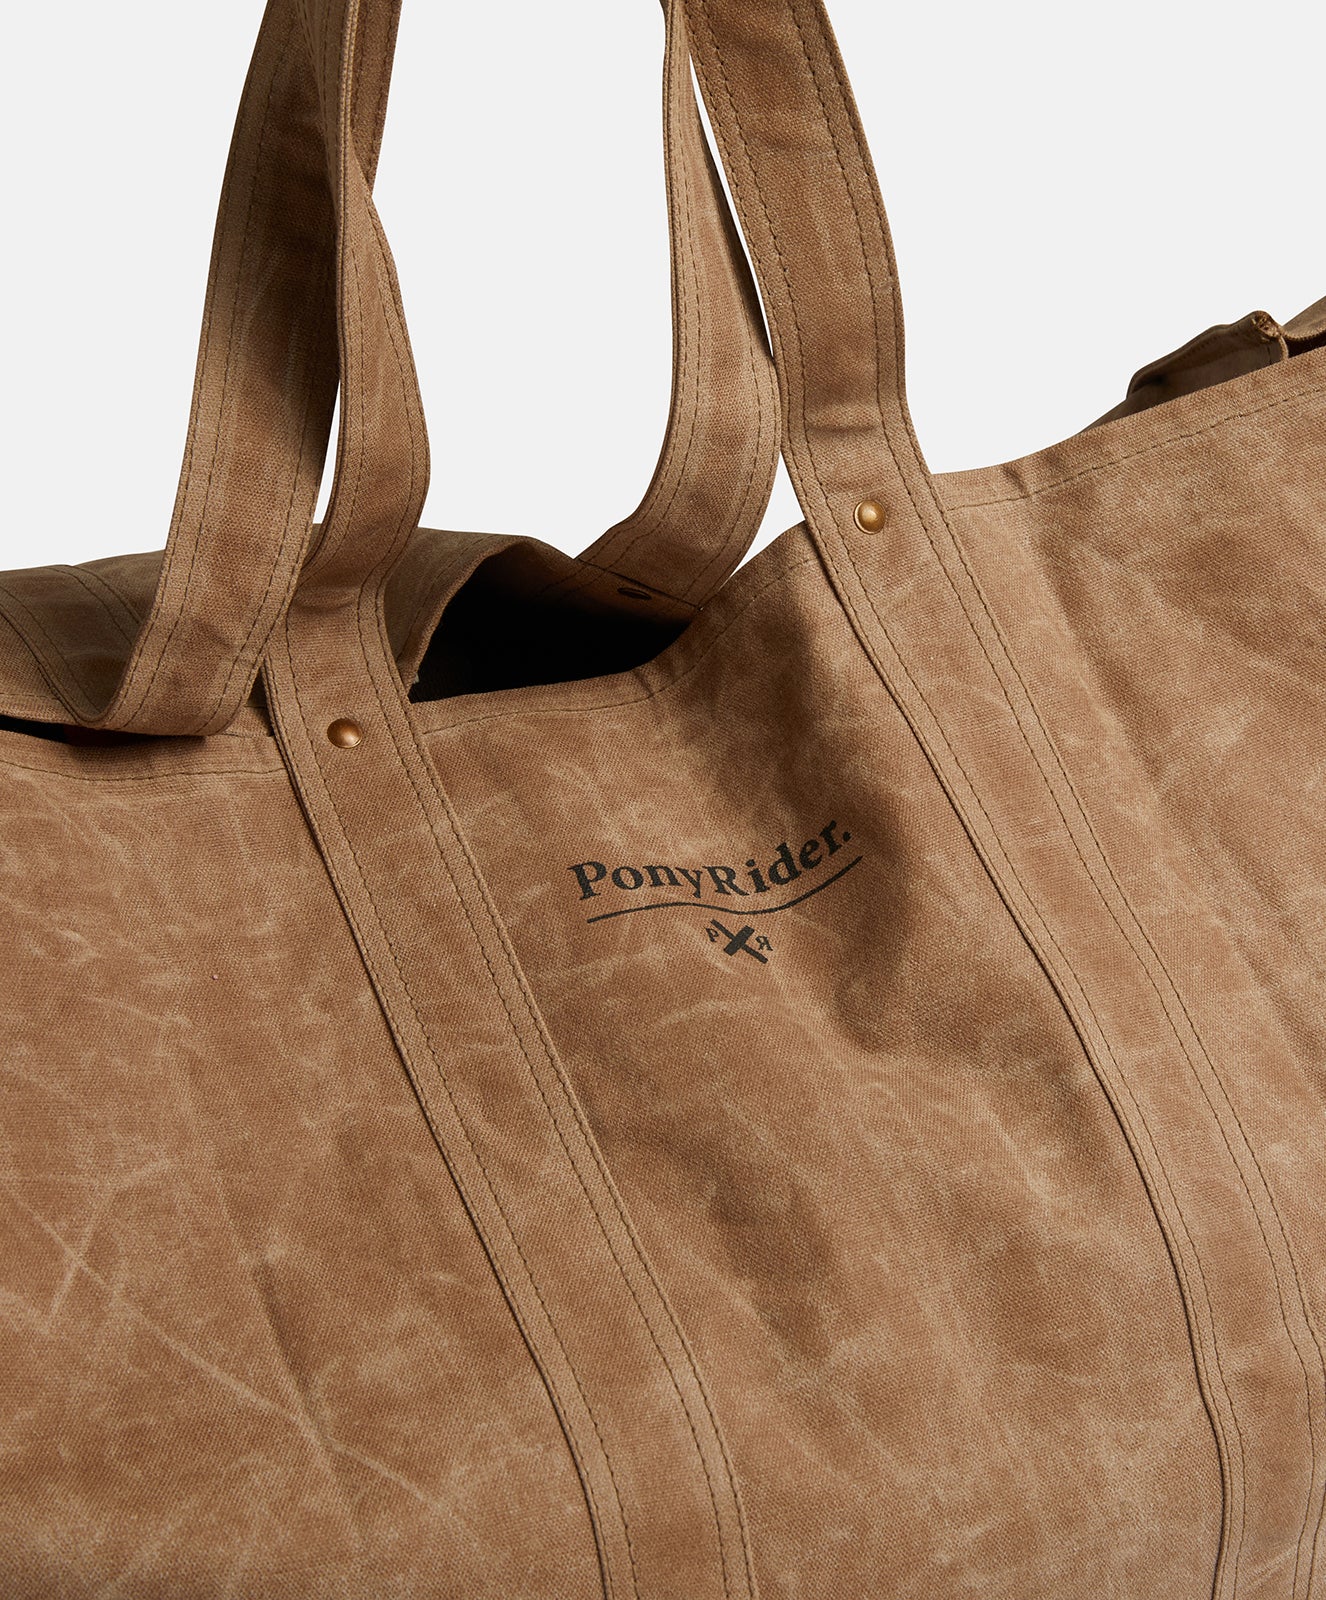 Market Carry All Canvas Tote Bag | Toffee Brown